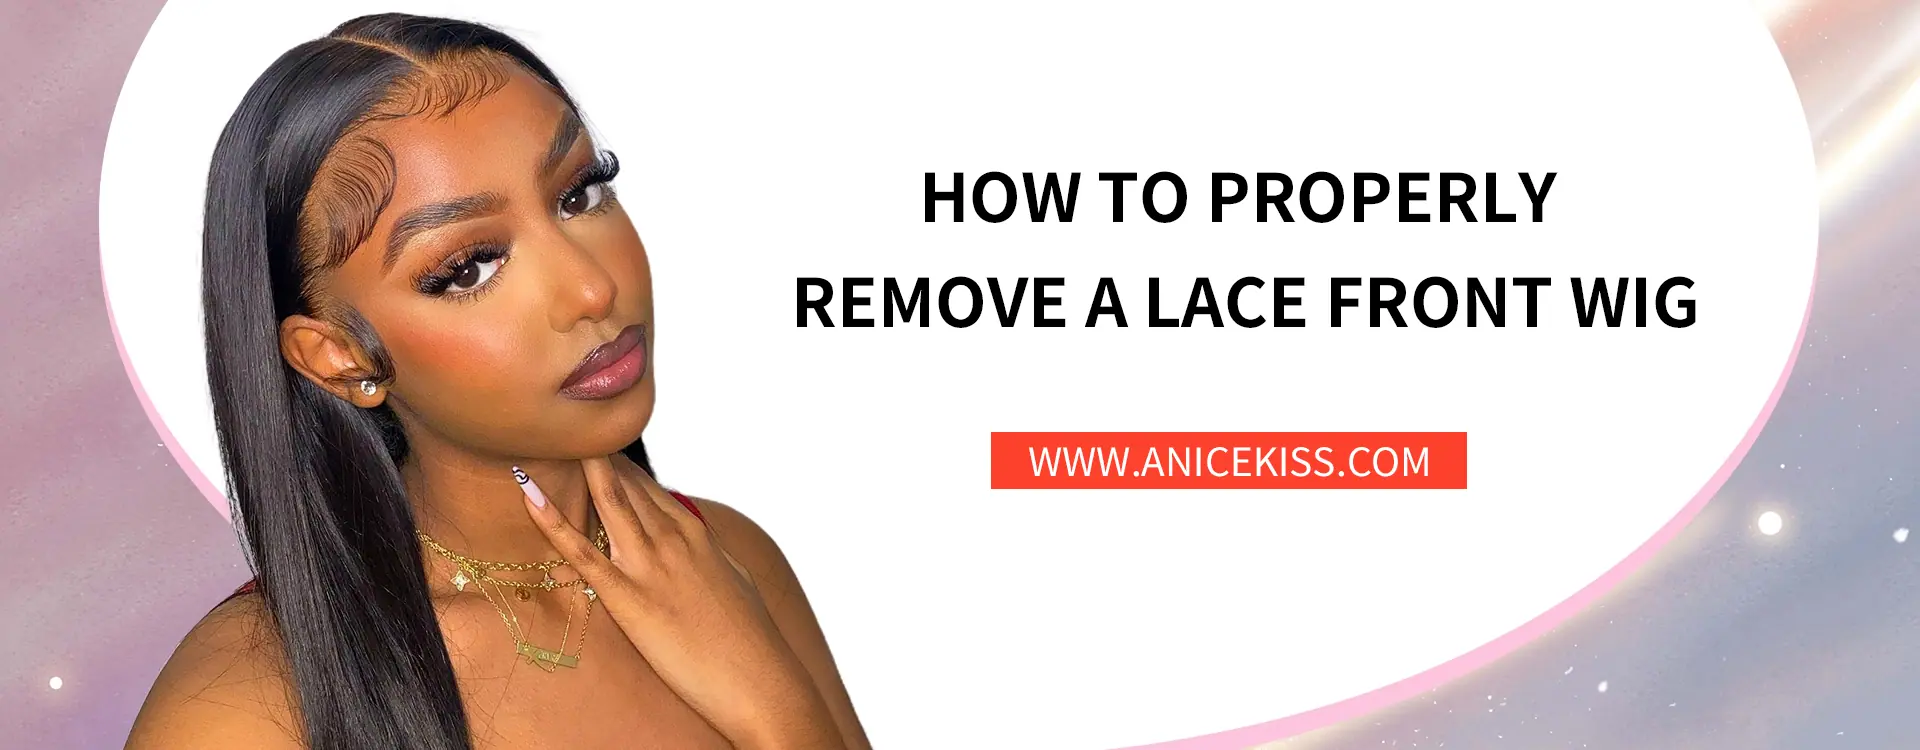 How to properly remove your lace front wig